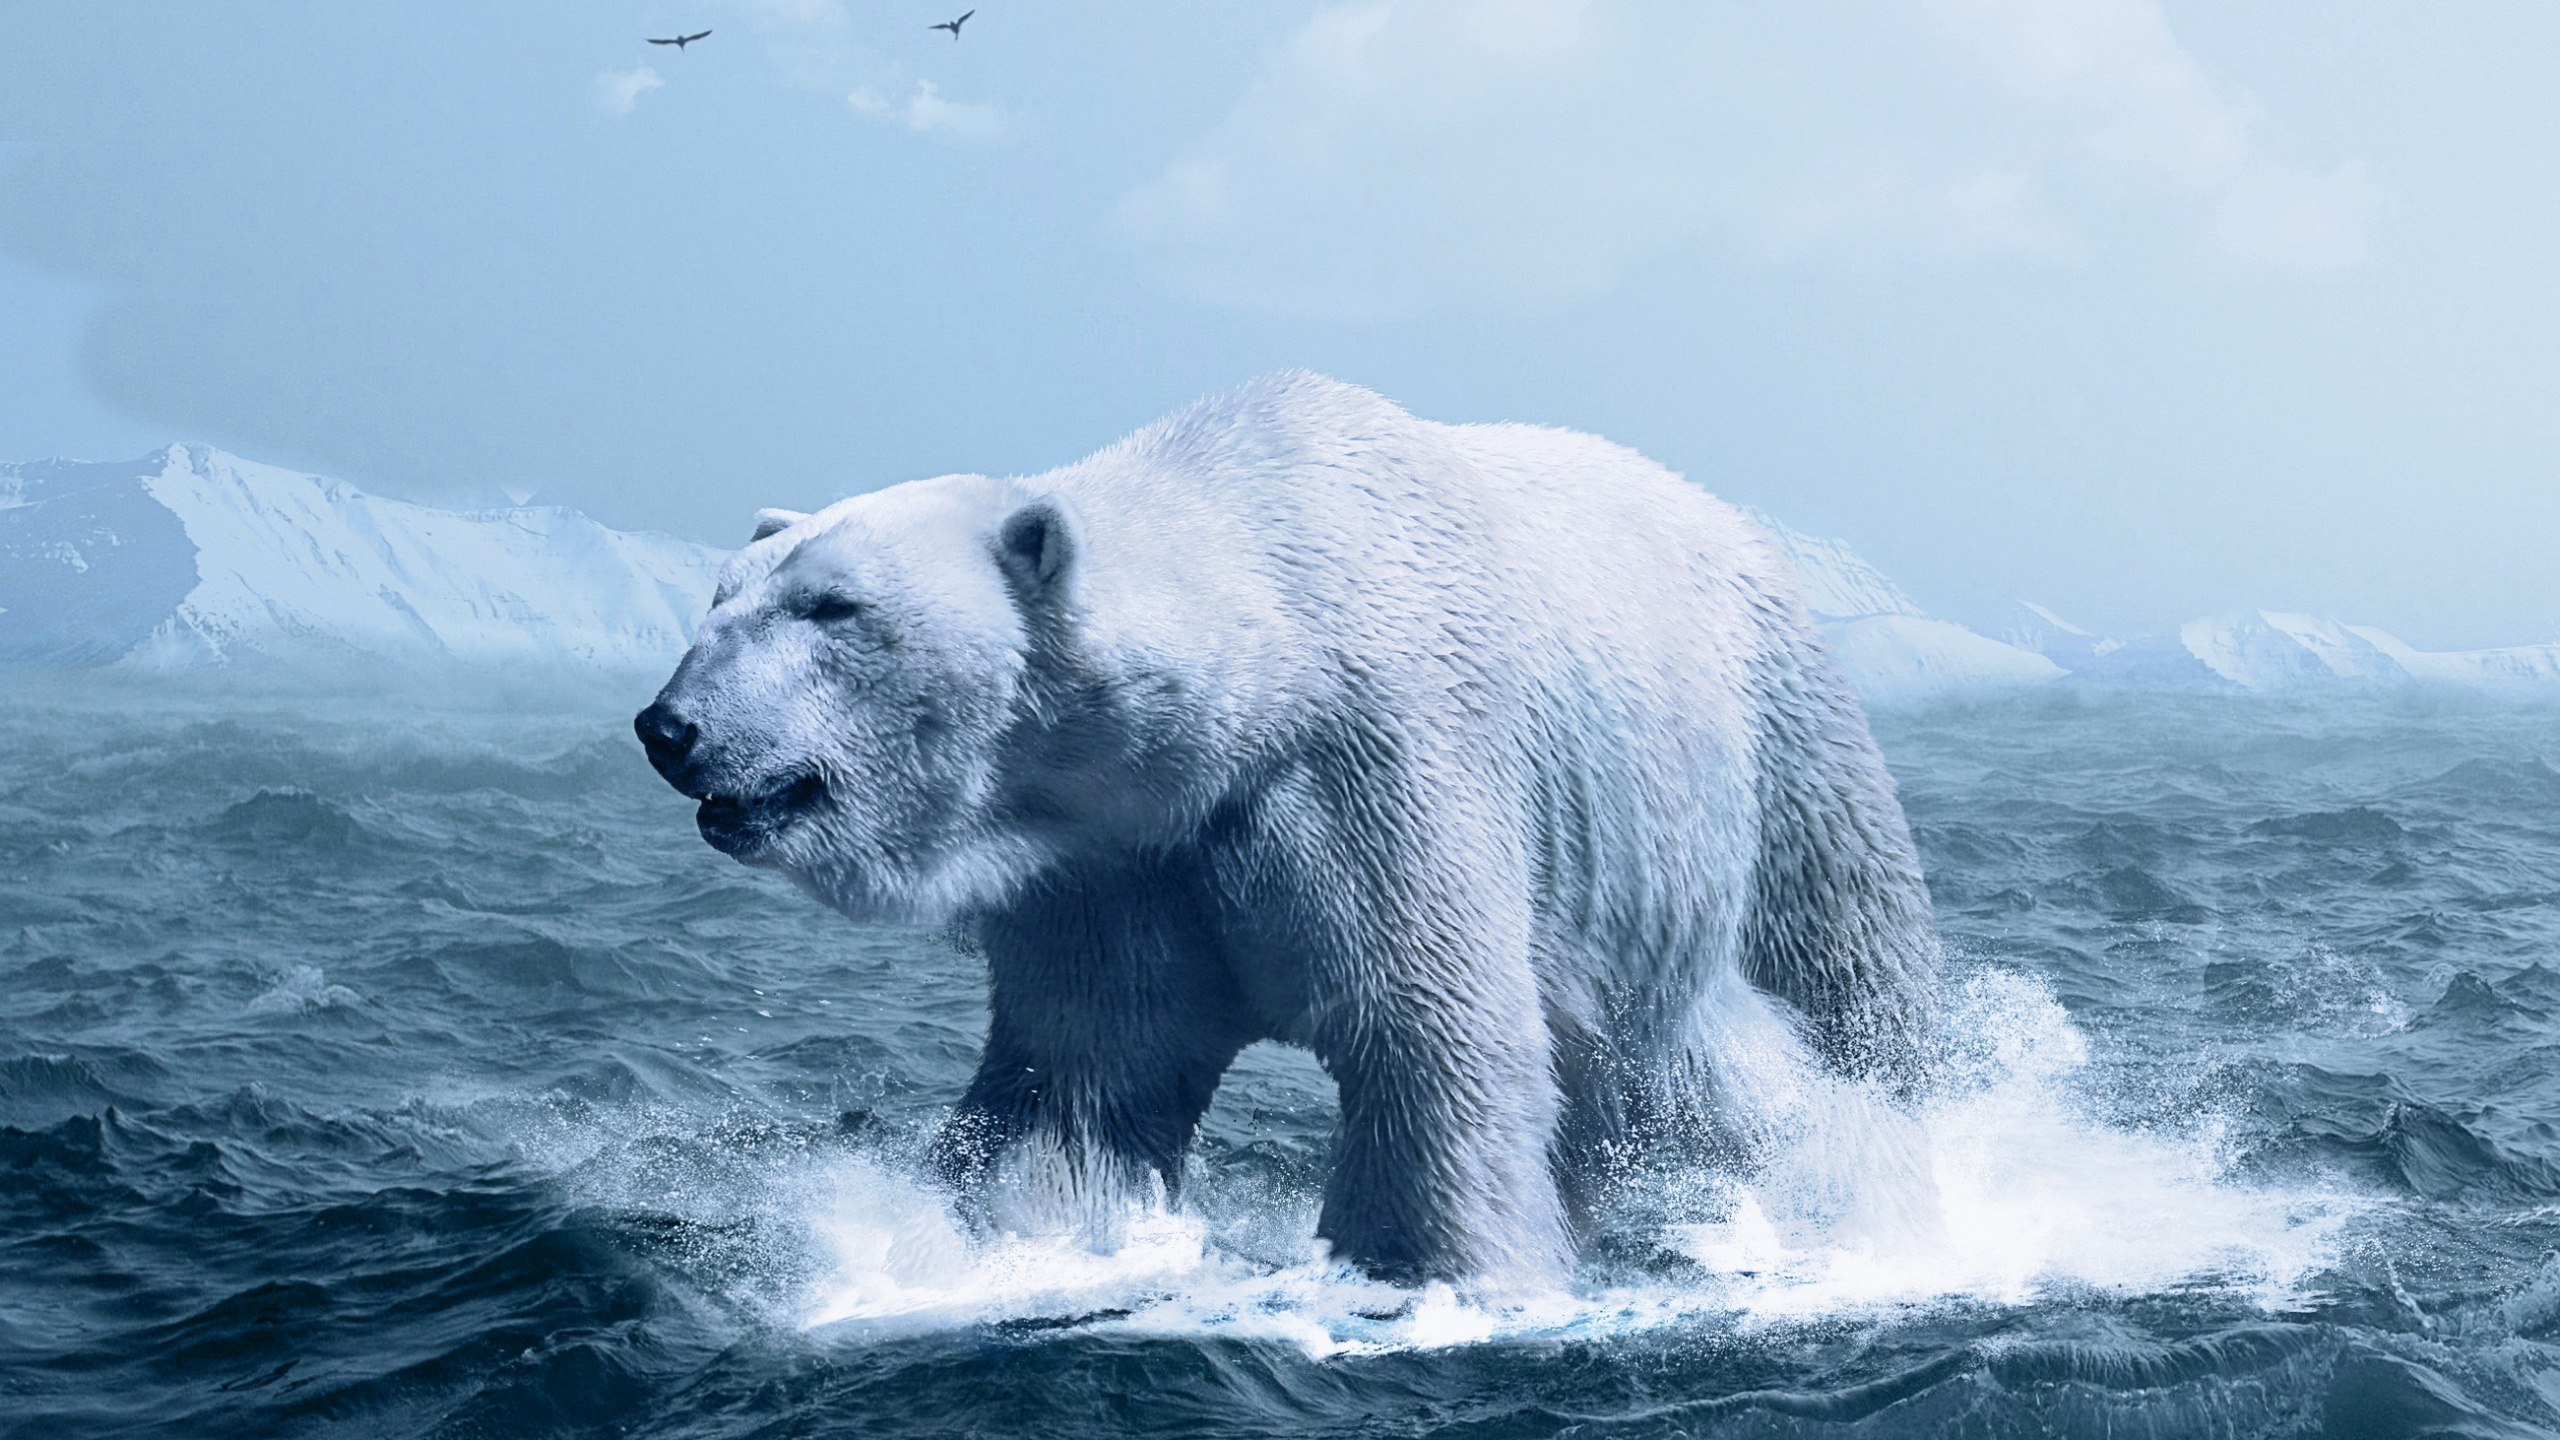 Polar Bear on The Water. Wallpaper in 2560x1440 Resolution